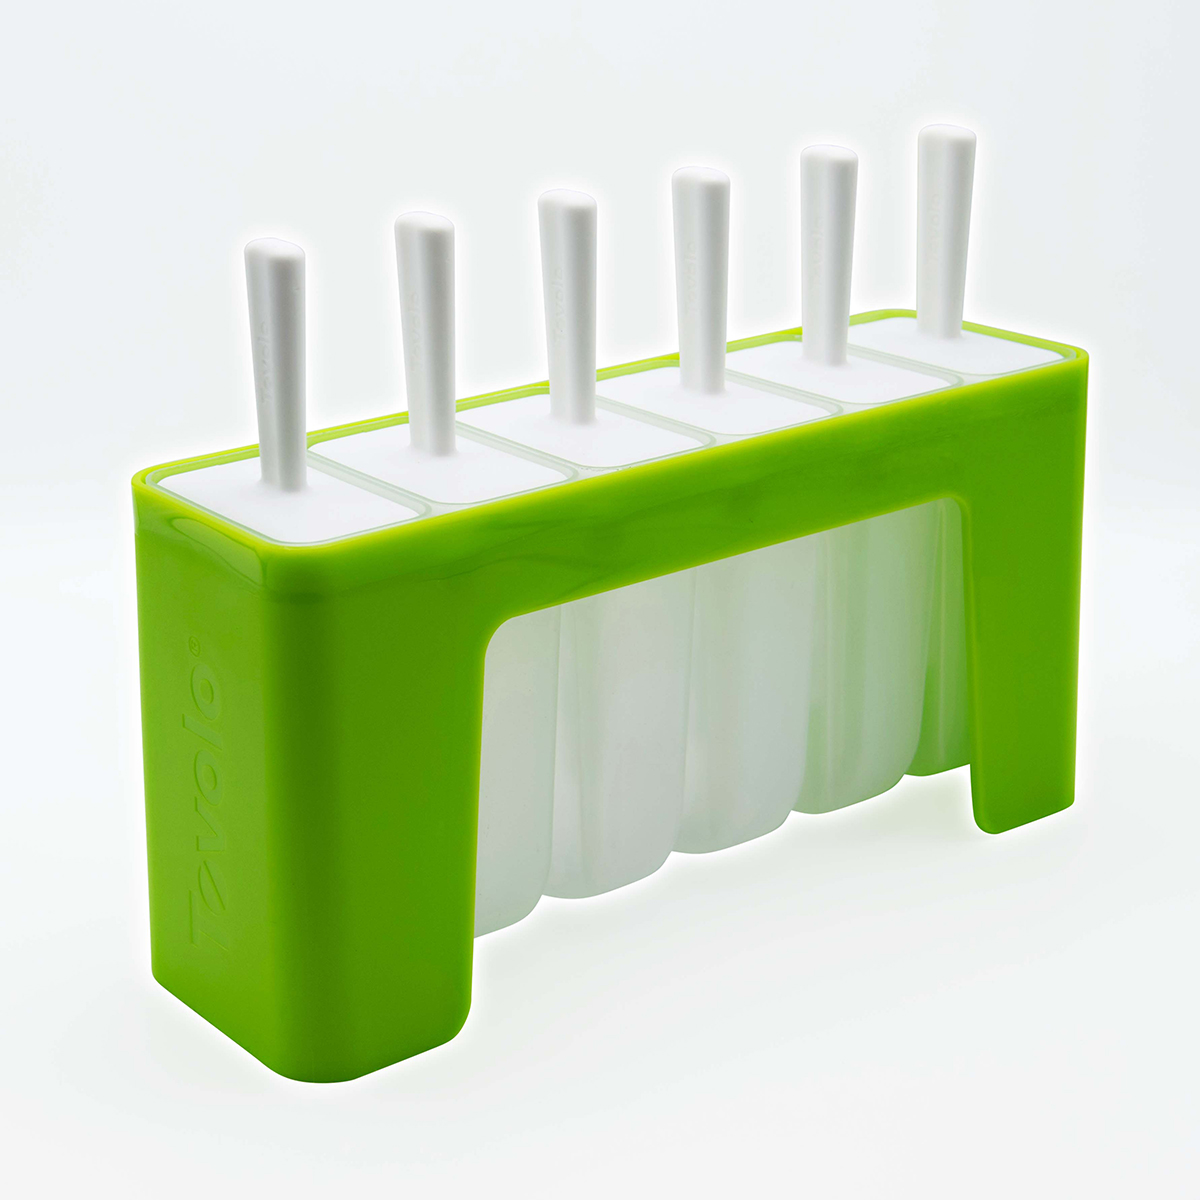 Tovolo Groovy 2 Pop Molds w/ Tray - Spring Green